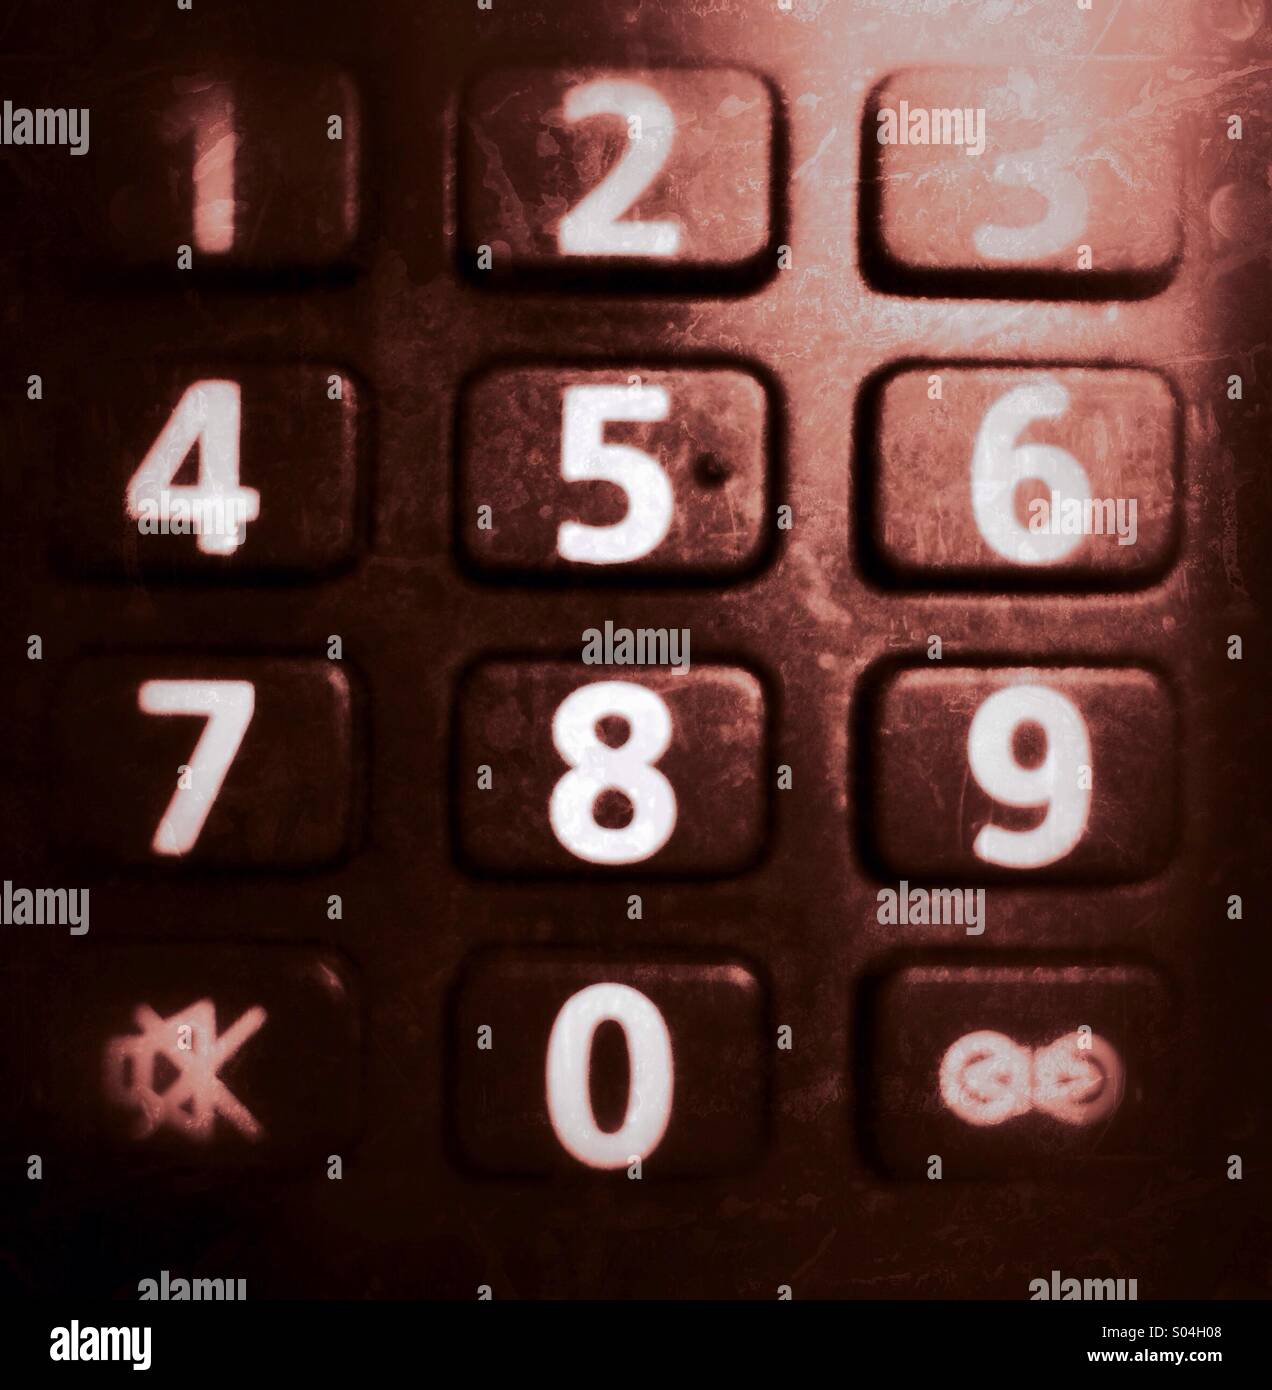 Numbers on TV remote control Stock Photo